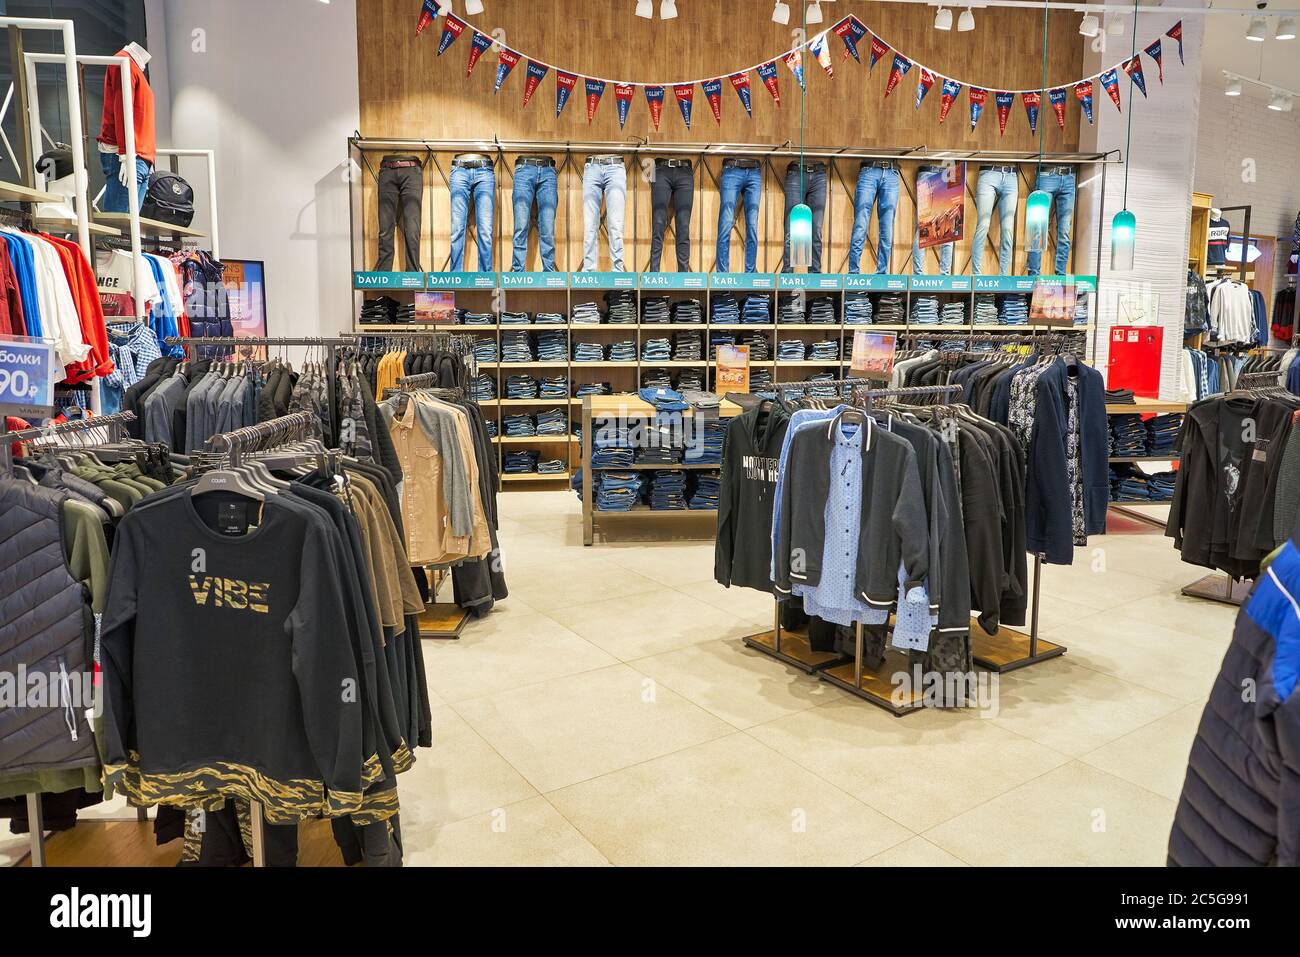 MOSCOW, RUSSIA - SEPTEMBER 14, 2019: interior shot of Colin's store at Salaris shopping mall in Moscow. Stock Photo